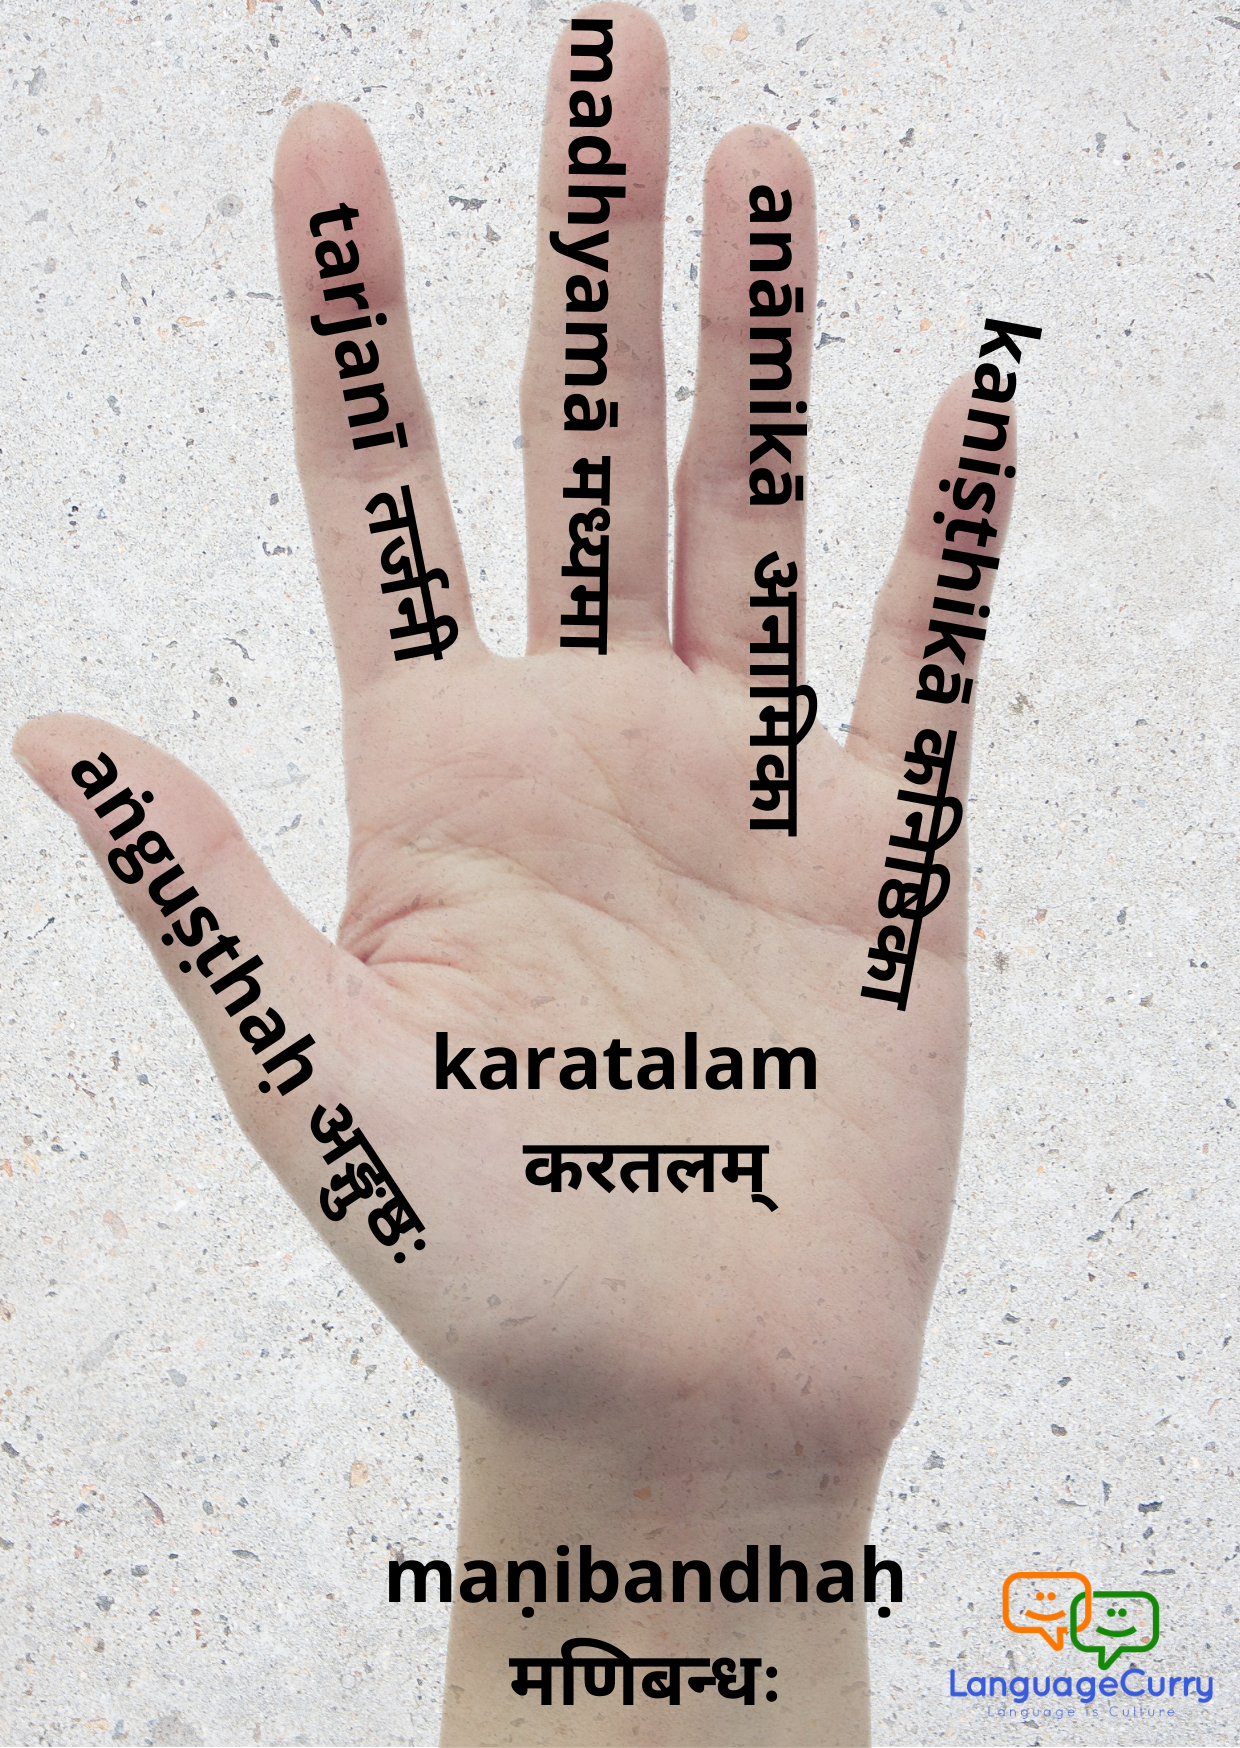 Names of parts of hand in Sanskrit